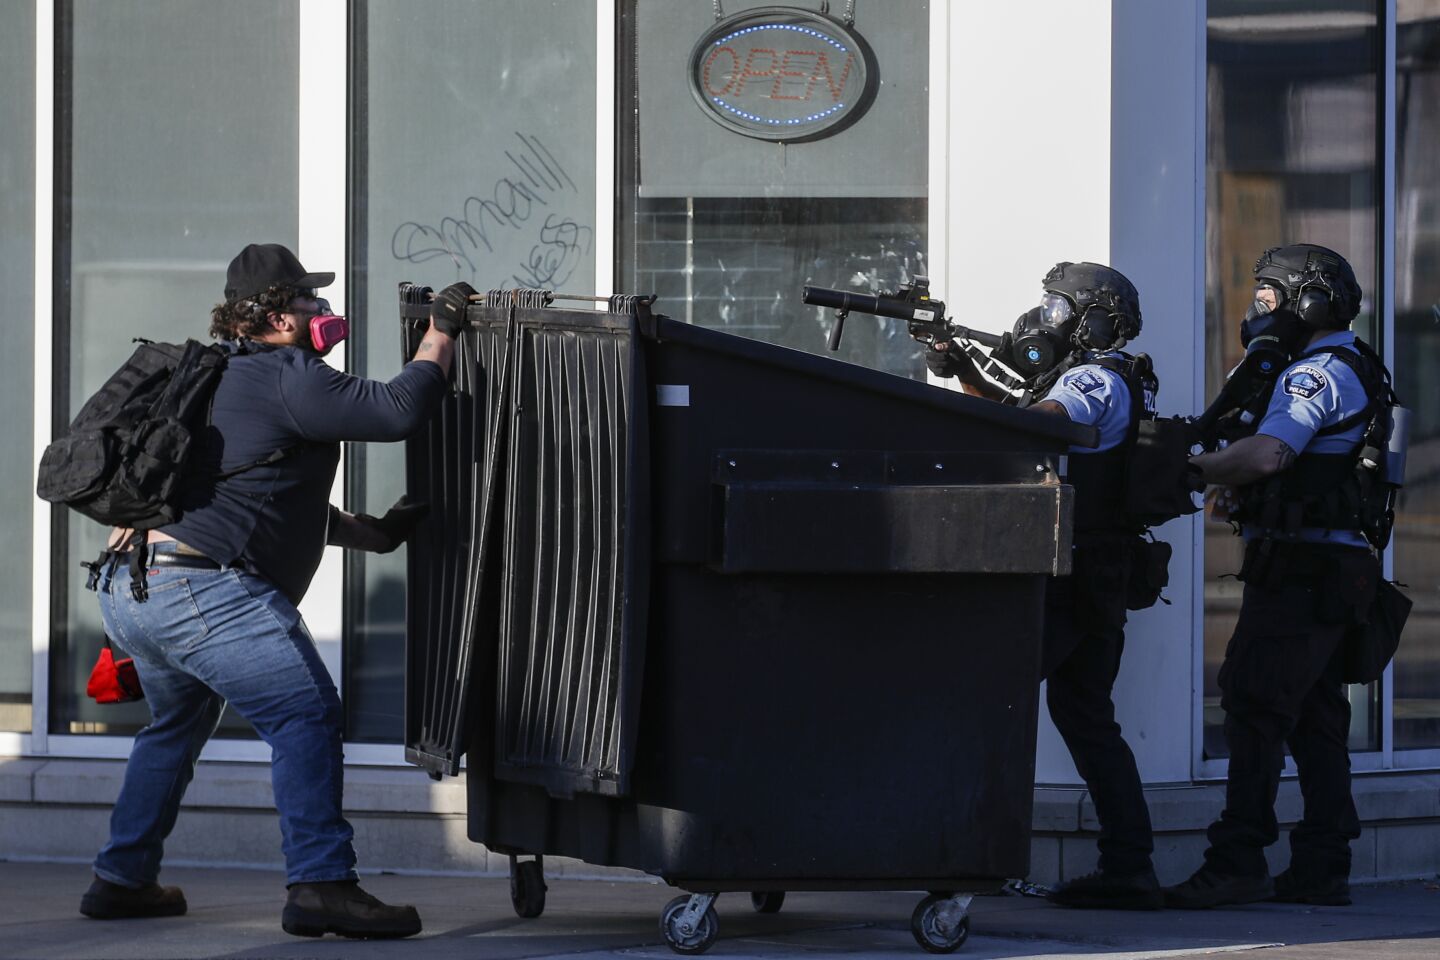 A protester faces off with two police officers using less-lethal ammunition in their weapons in St. Paul.